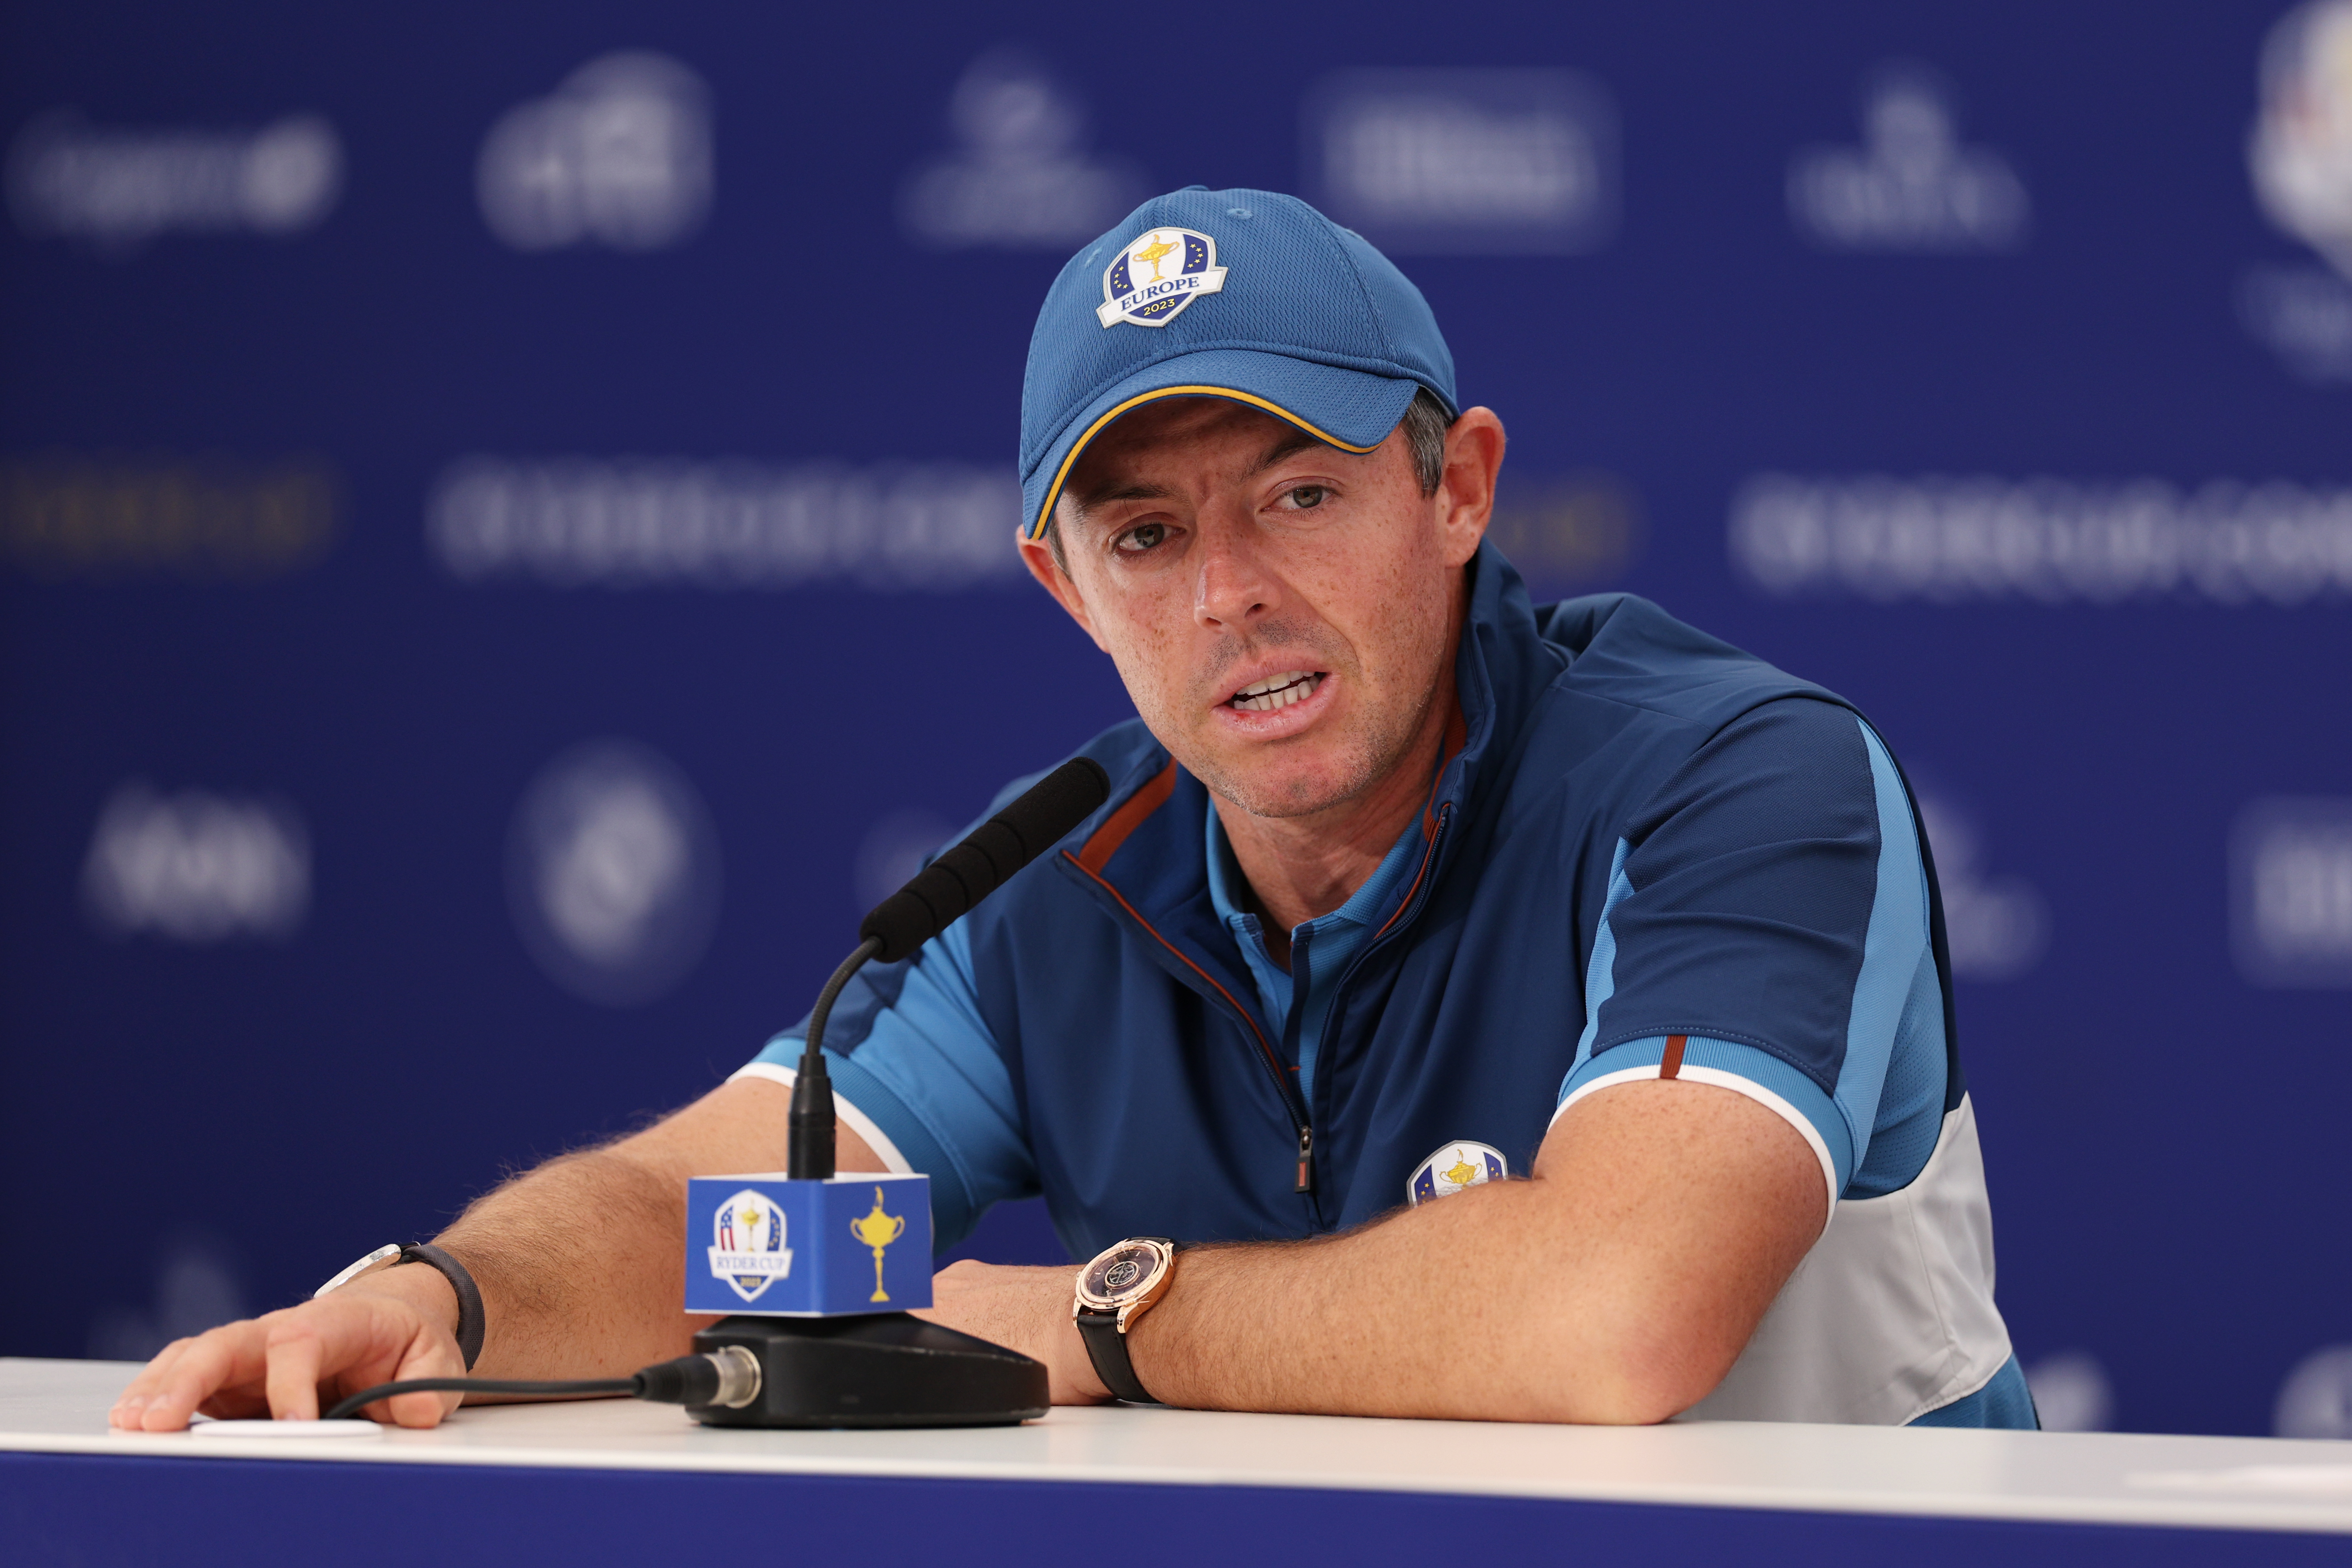 McIlroy almost found himself in a similar situation to Glover at the 2012 Ryder Cup